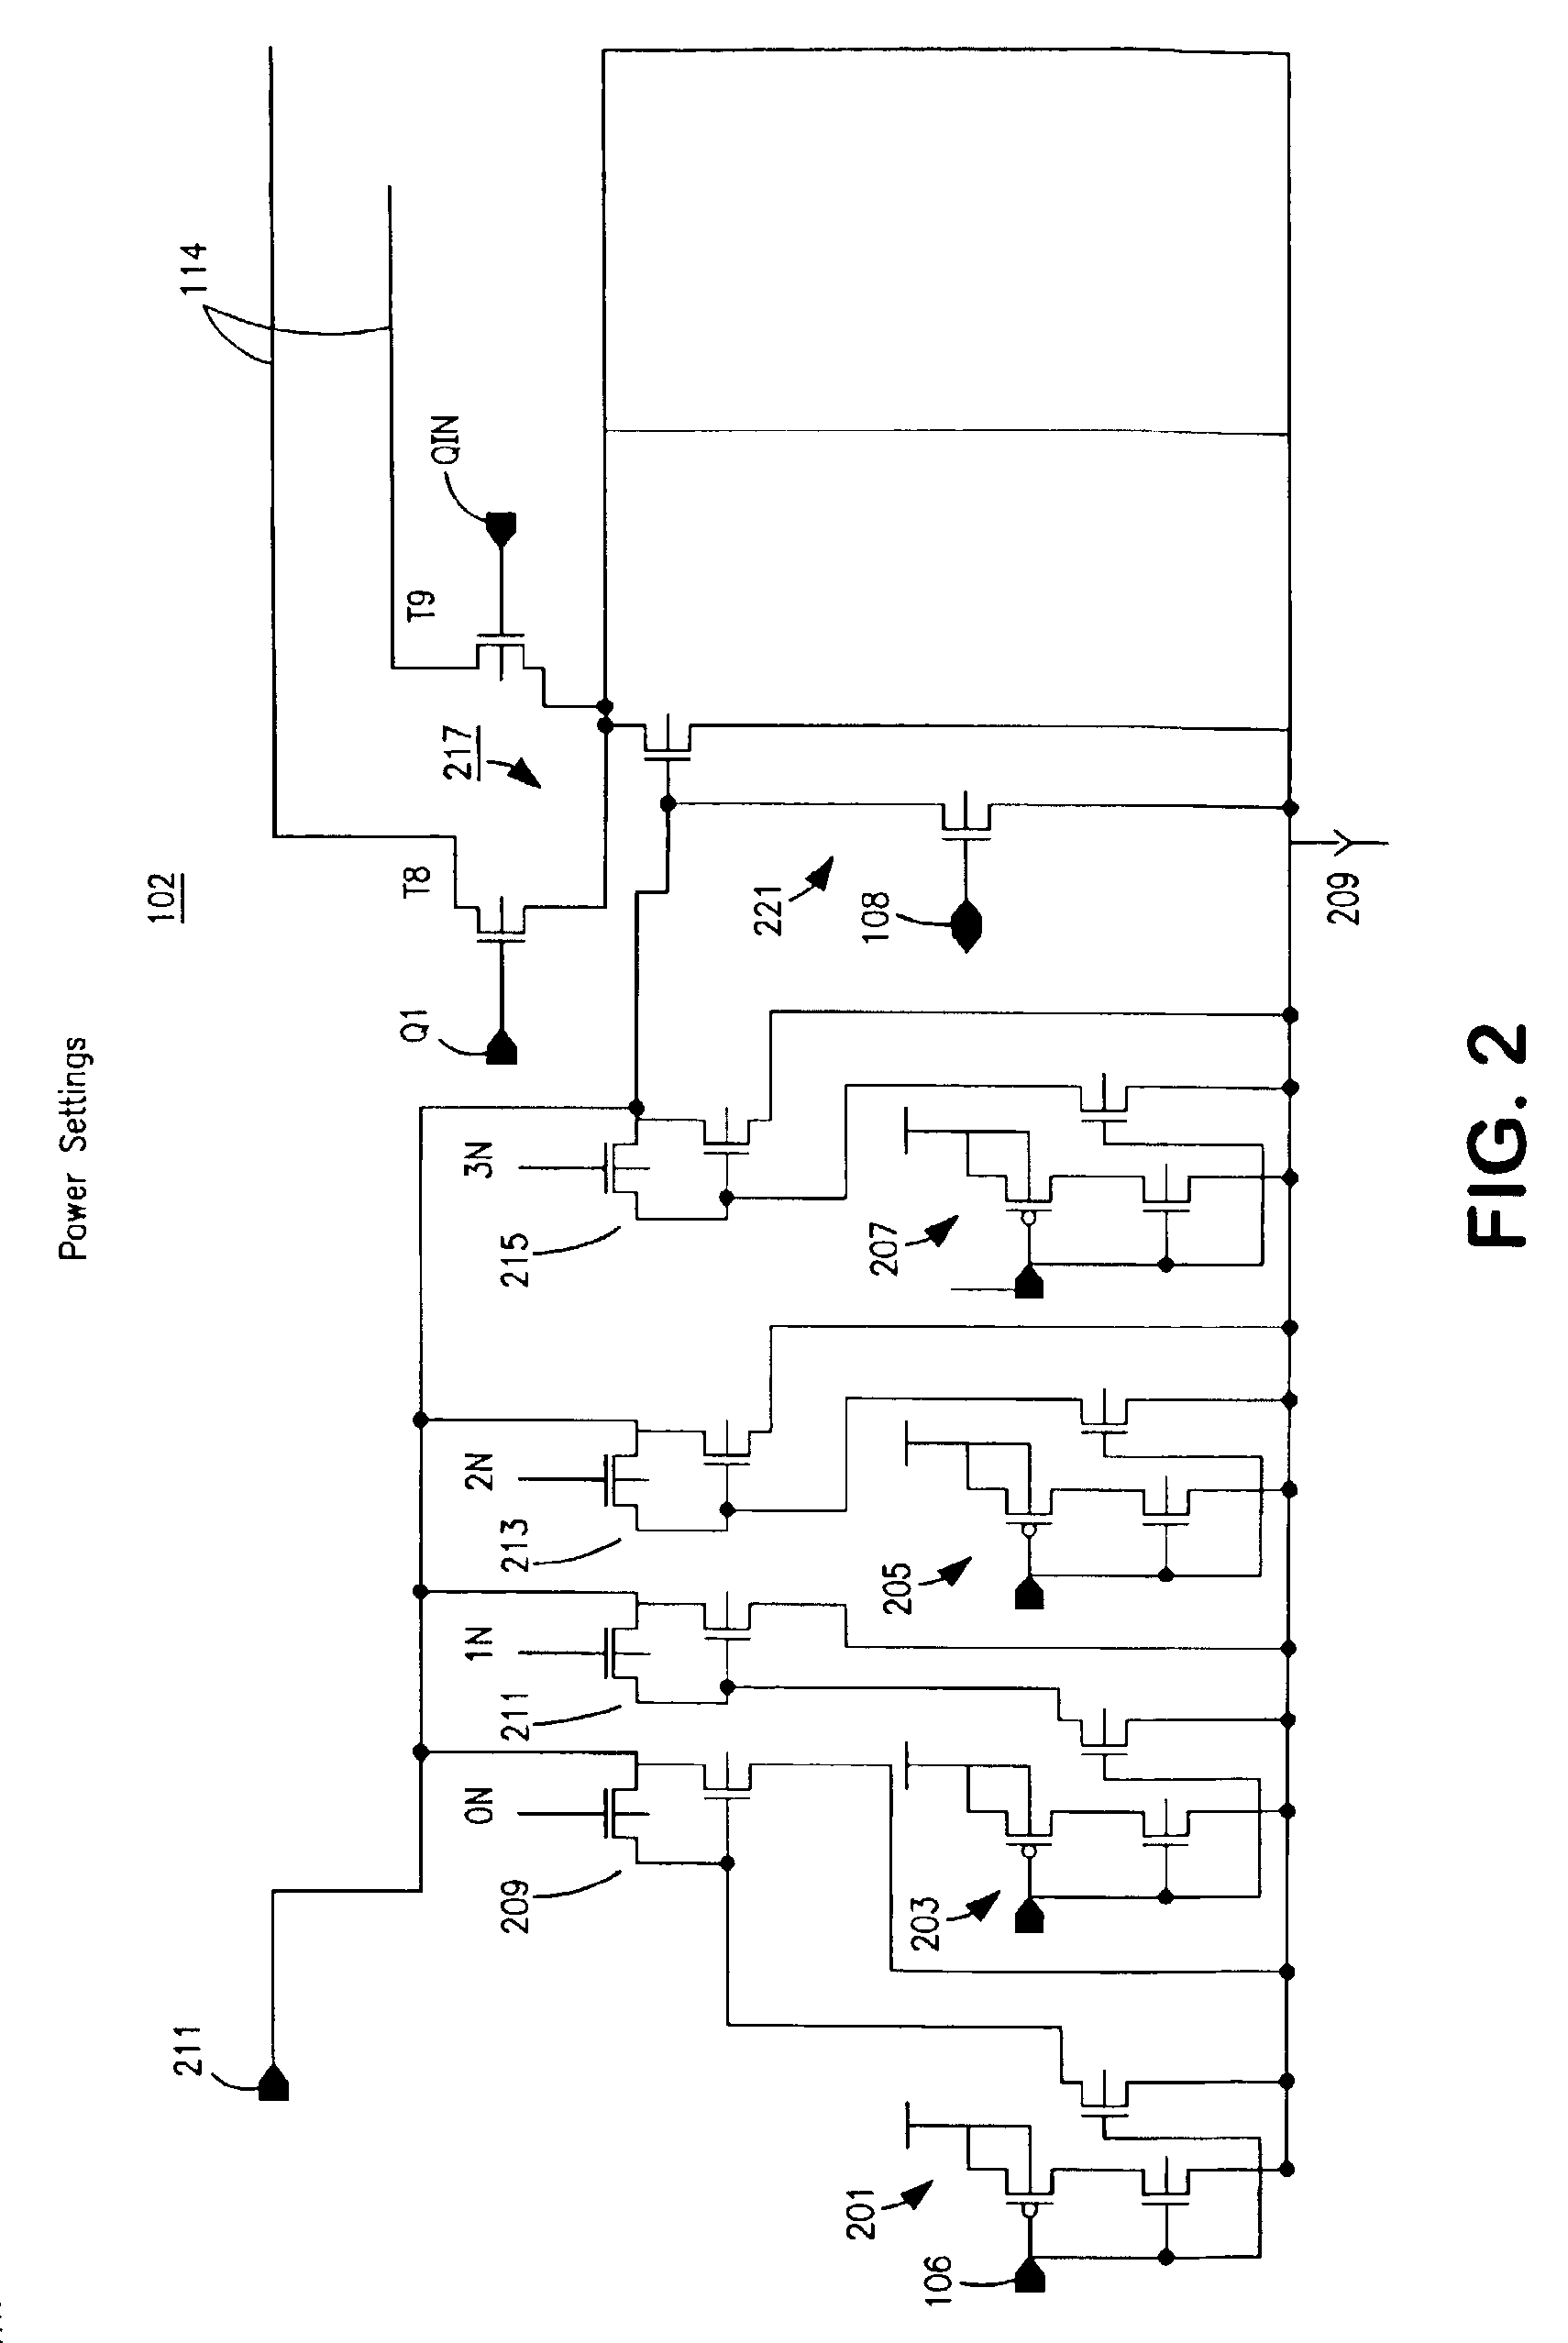 Programmable driver/equalizer with alterable analog finite impulse response (FIR) filter having low intersymbol interference and constant peak amplitude independent of coefficient settings